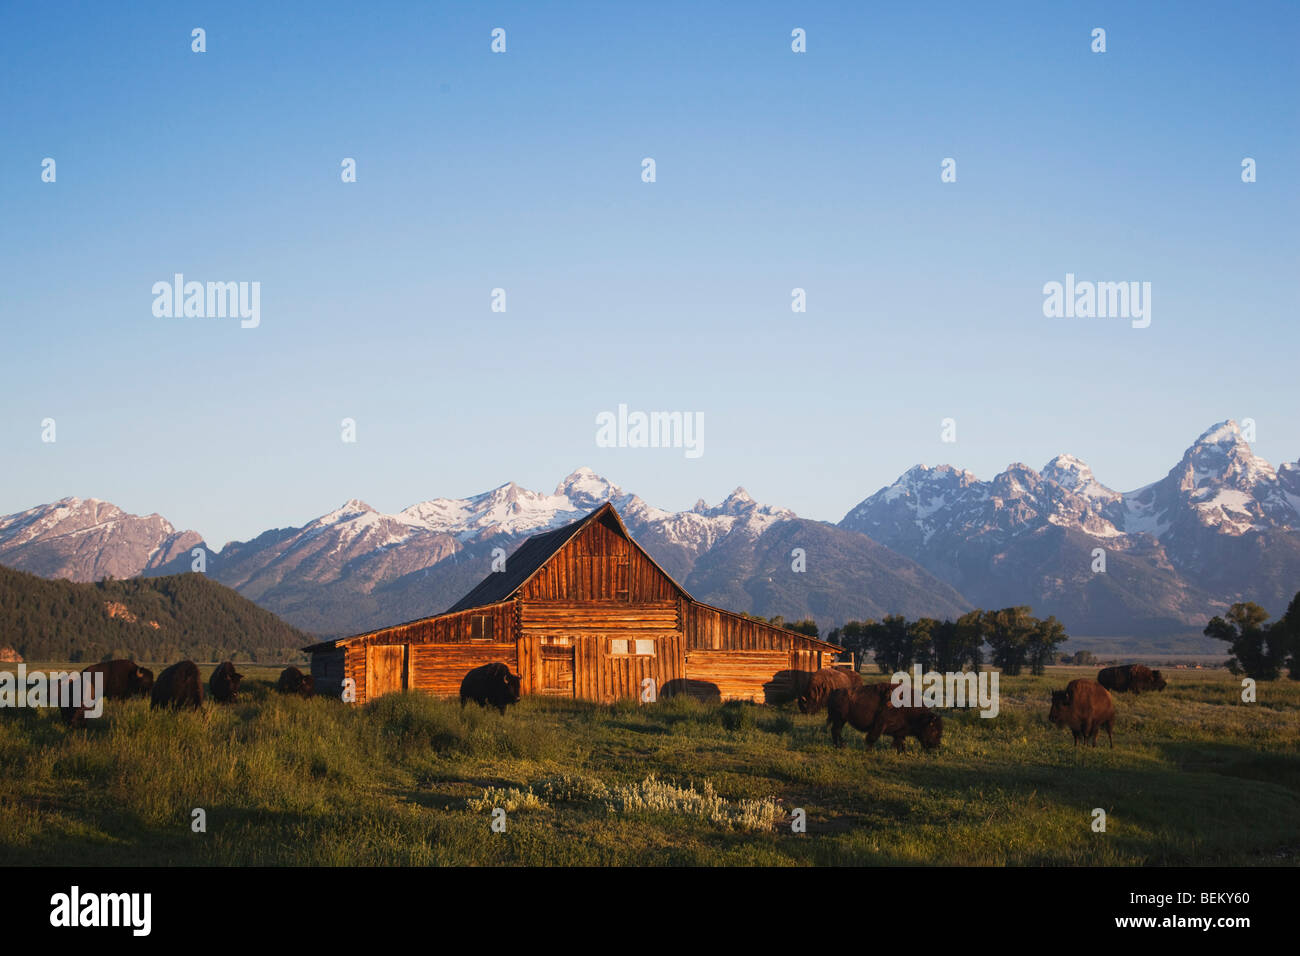 American Bison, Buffalo (Bison bison) herd in front of old wooden Barn and grand teton range,Grand Teton NP,Wyoming, USA Stock Photo